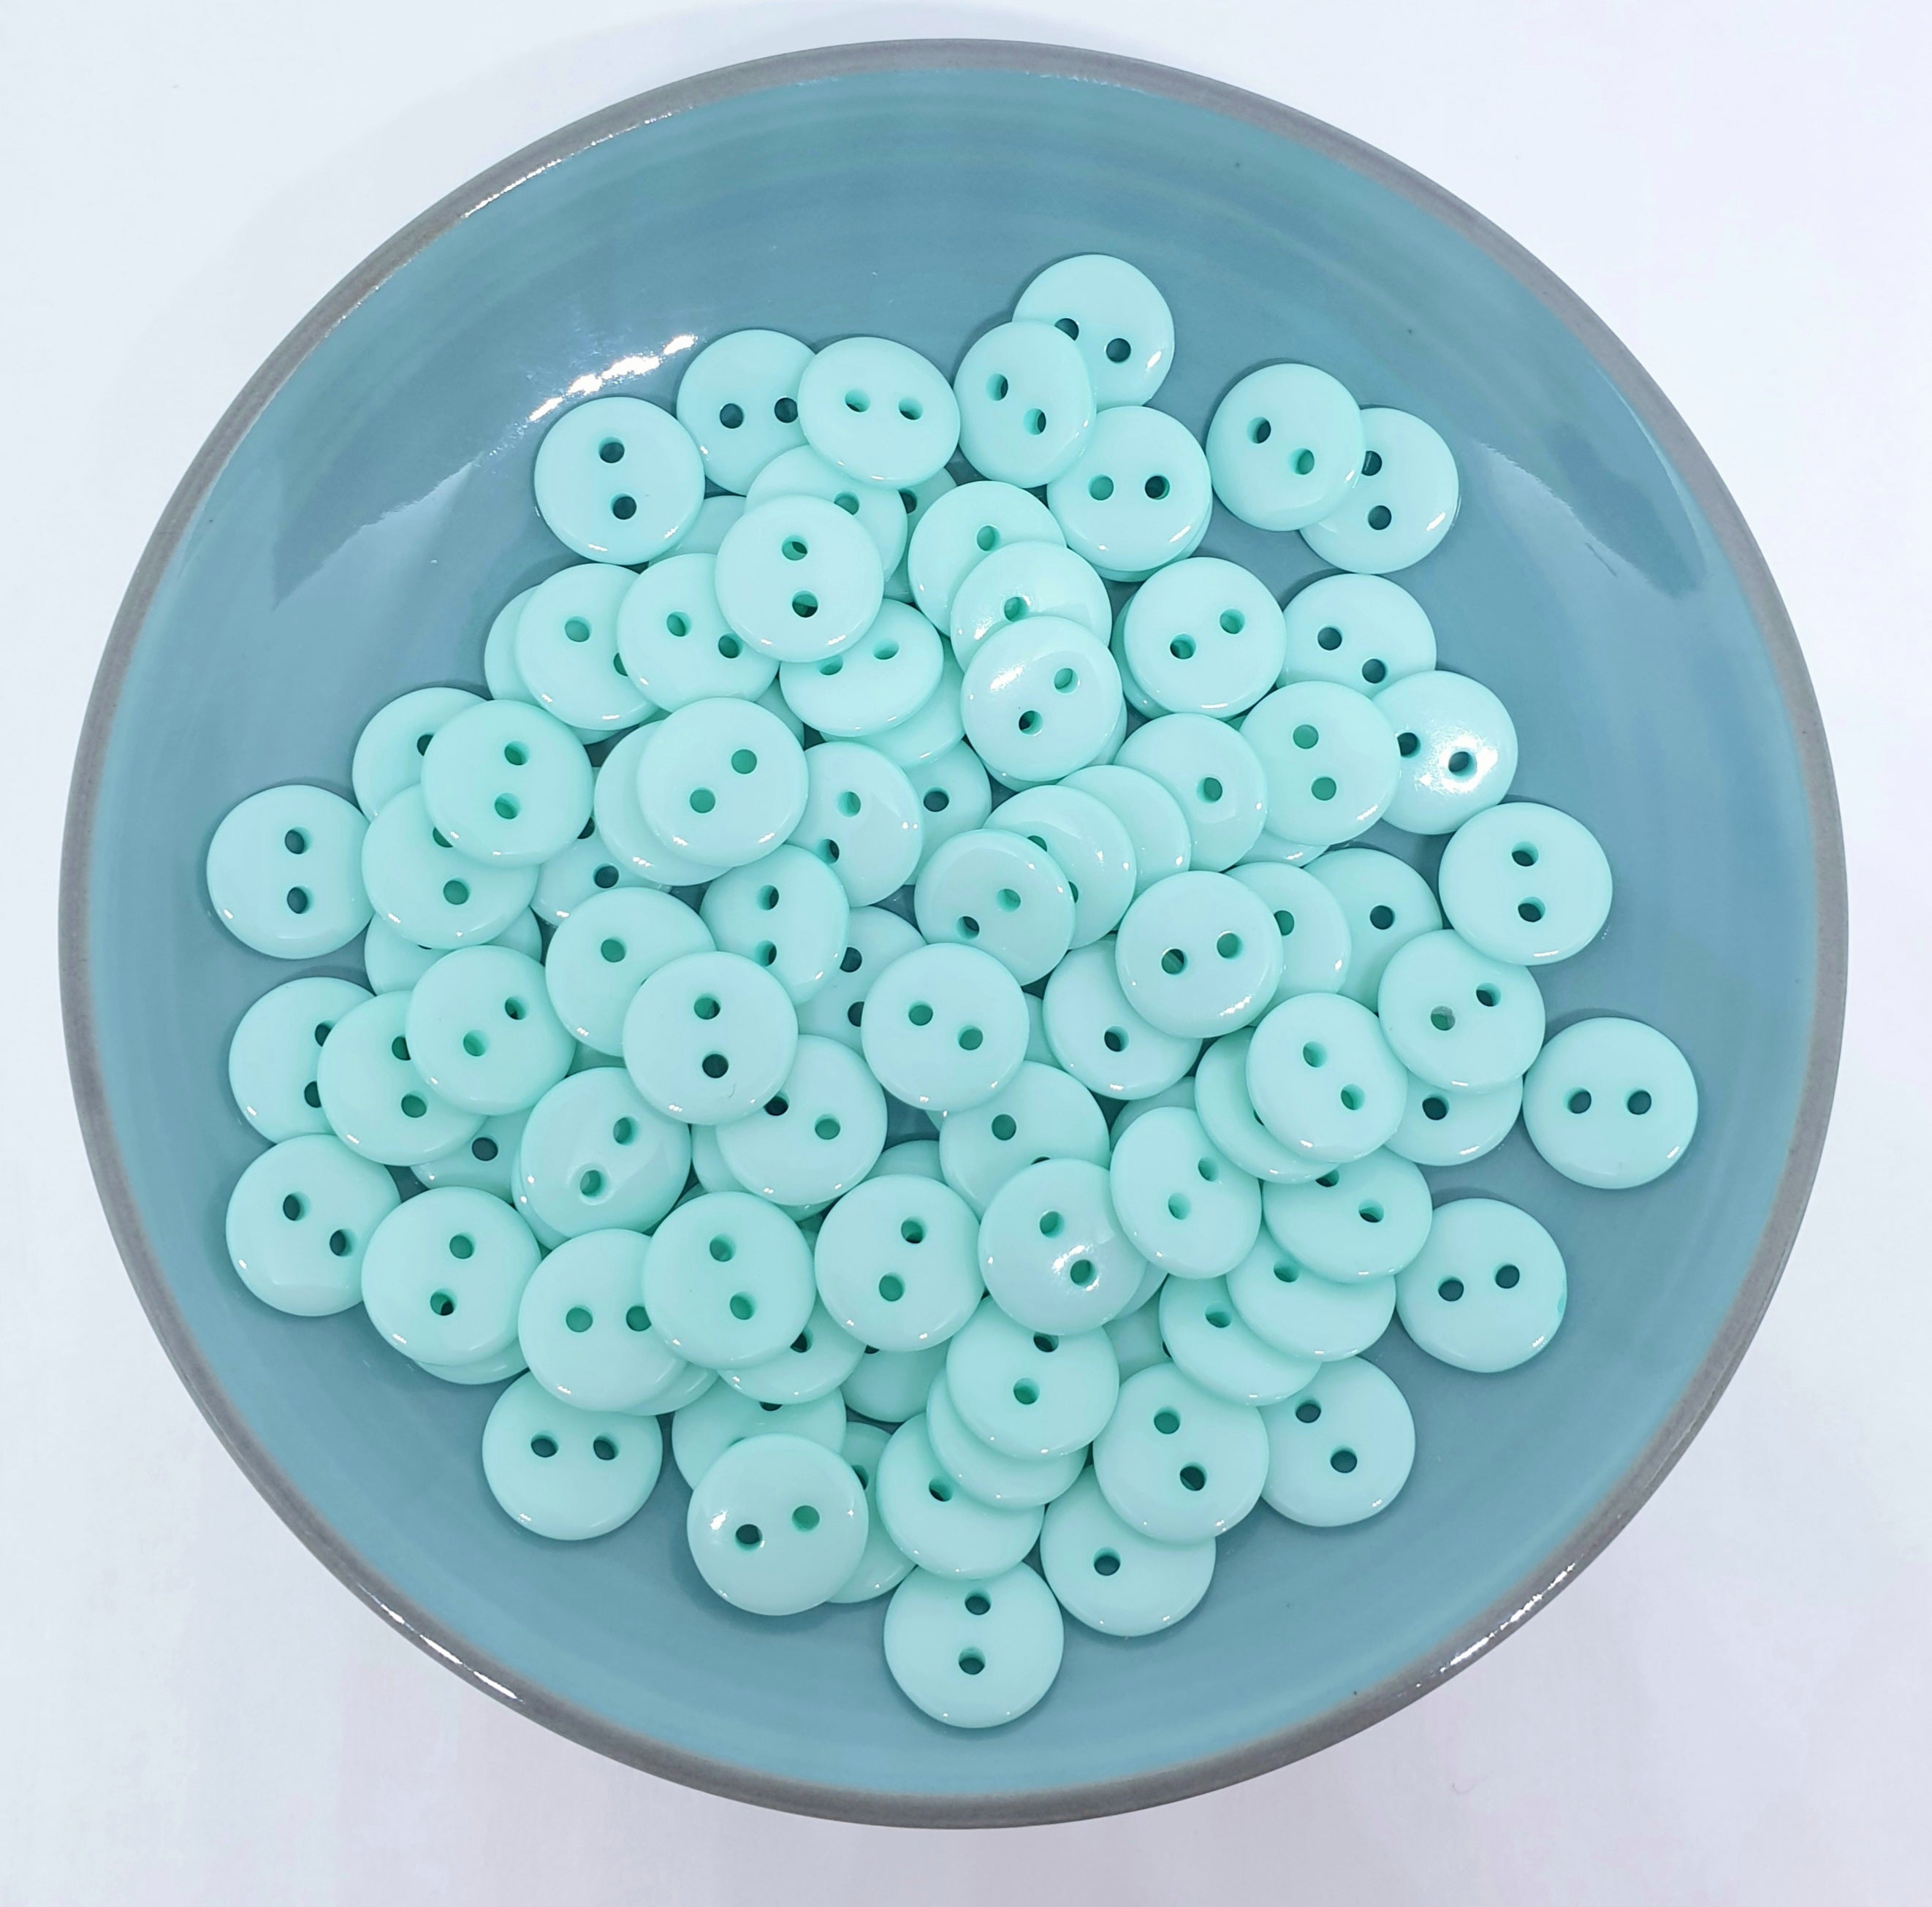 MajorCrafts 120pcs 10mm Aquamarine Blue 2 Holes Small Round Resin Sewing Buttons B20